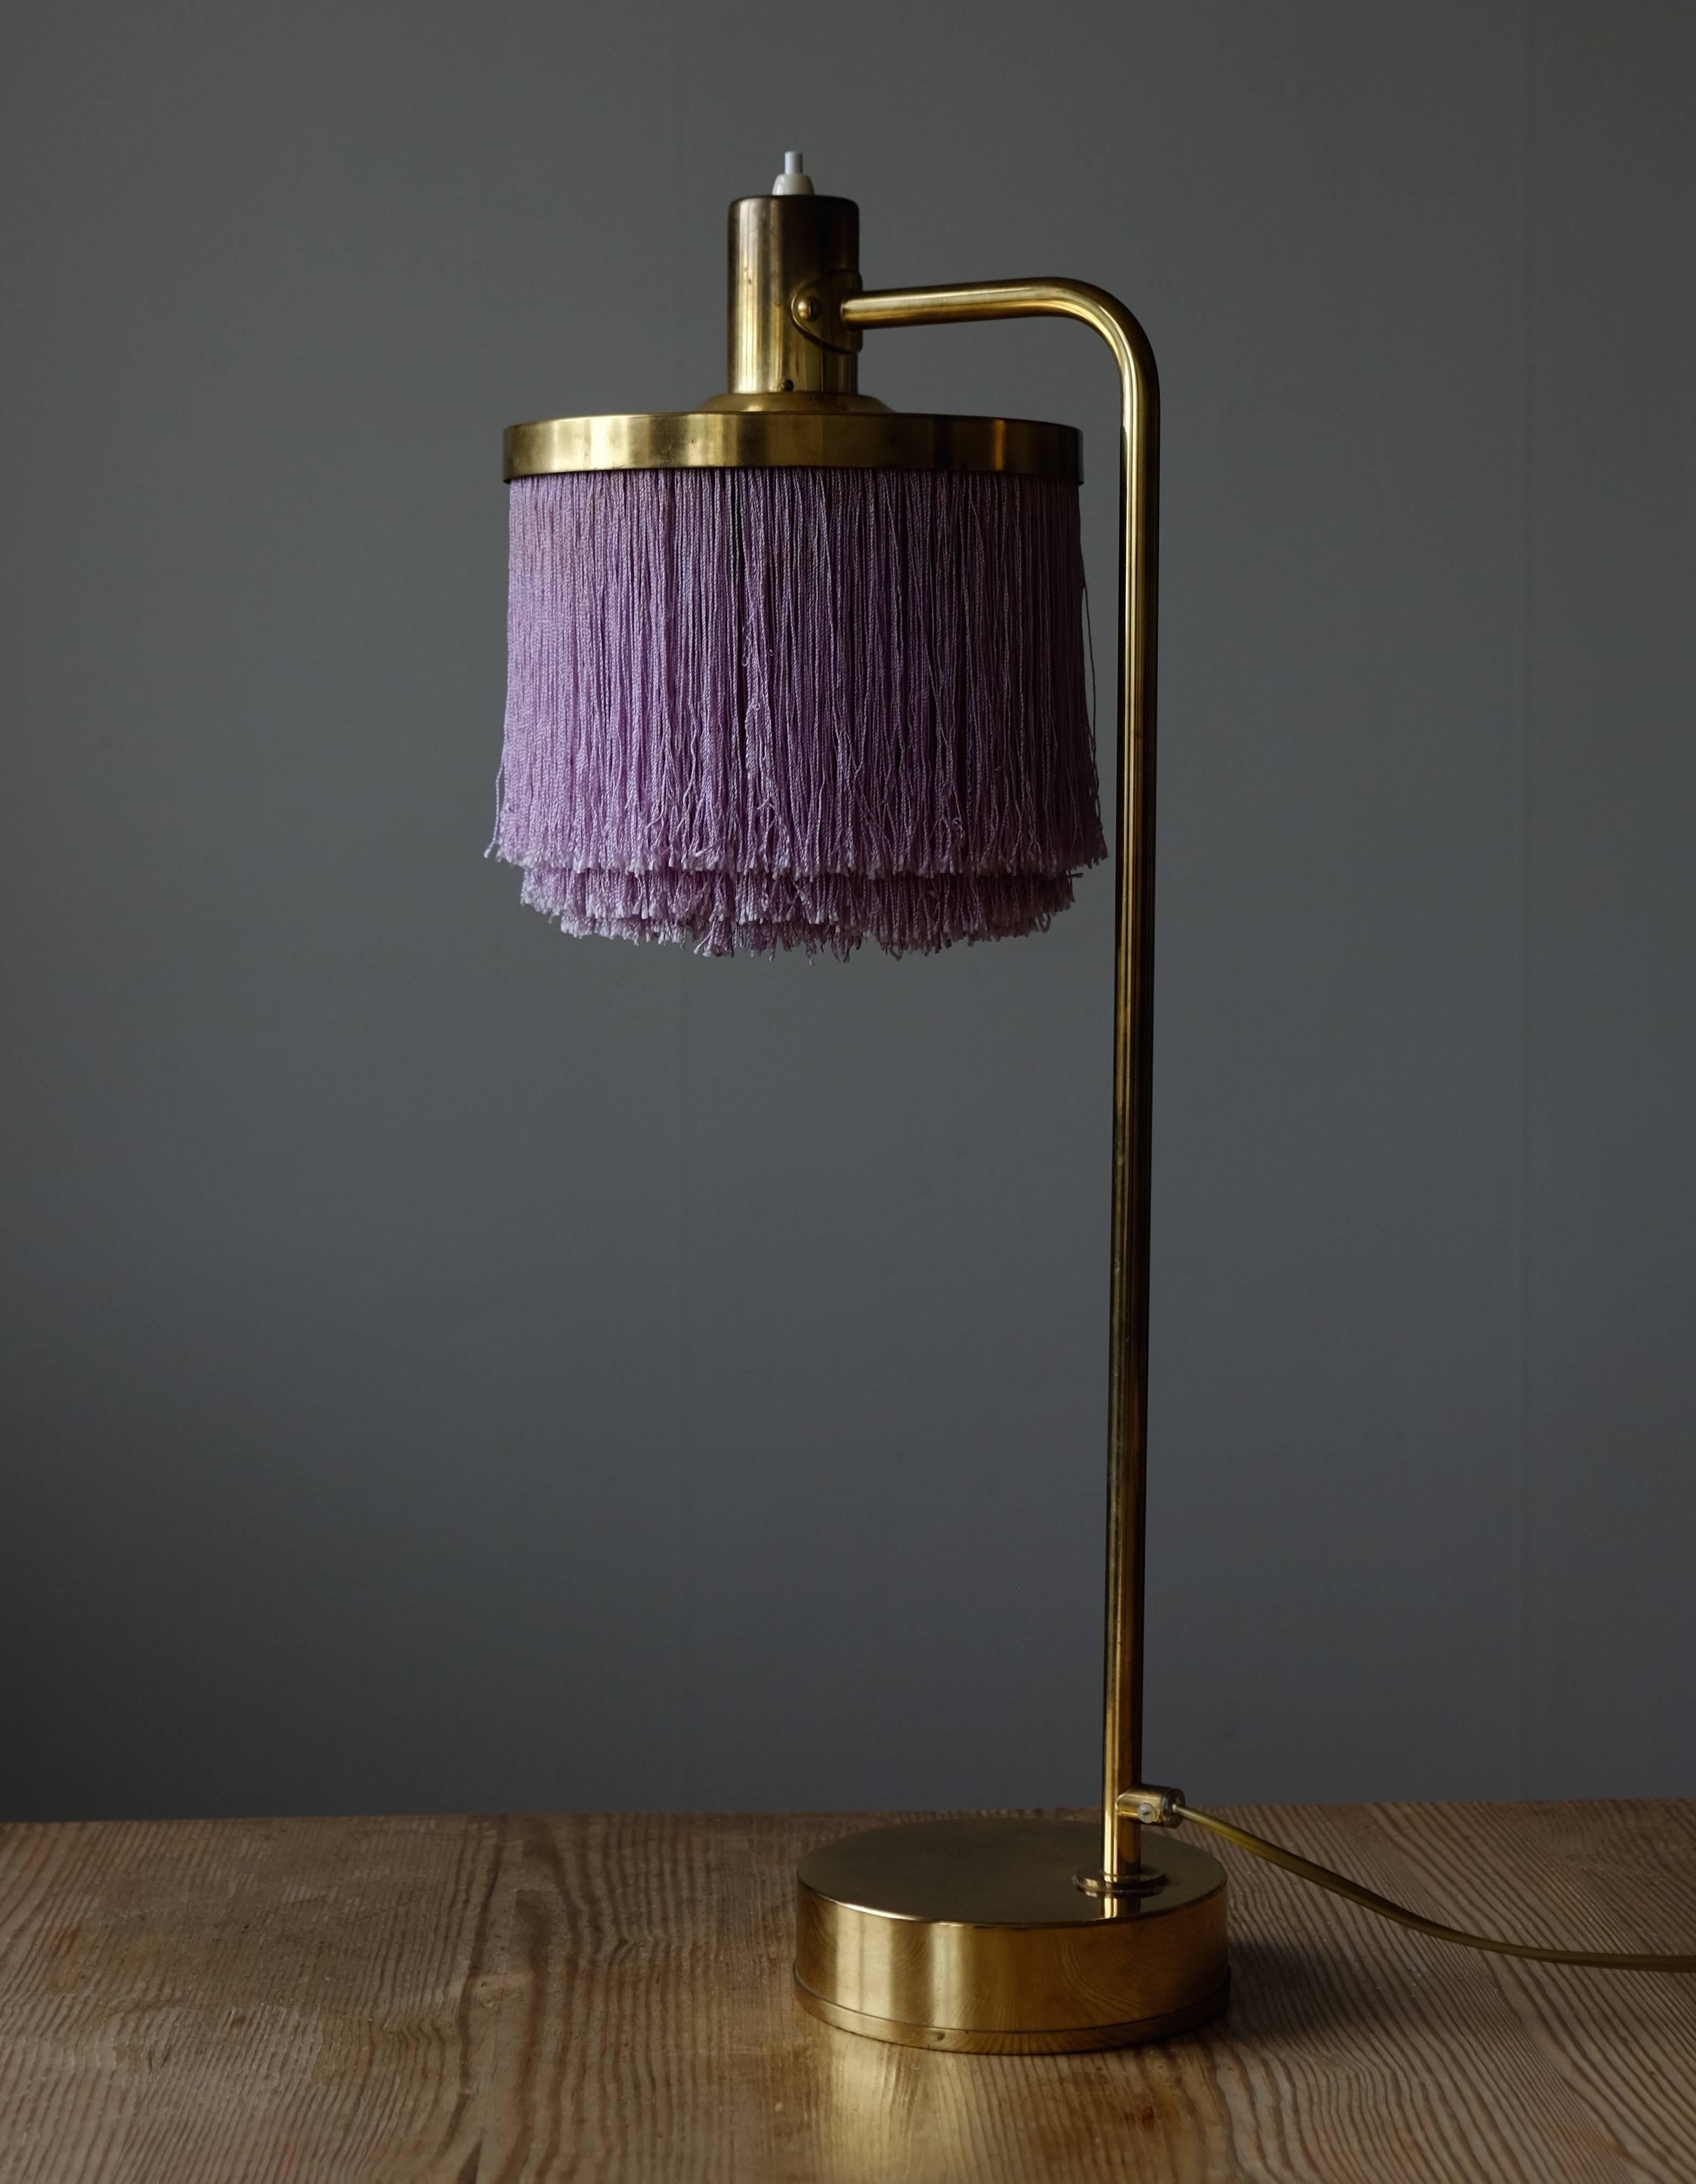 Brass table lamp produced by Hans-Agne Jakobsson in Markaryd, Sweden.